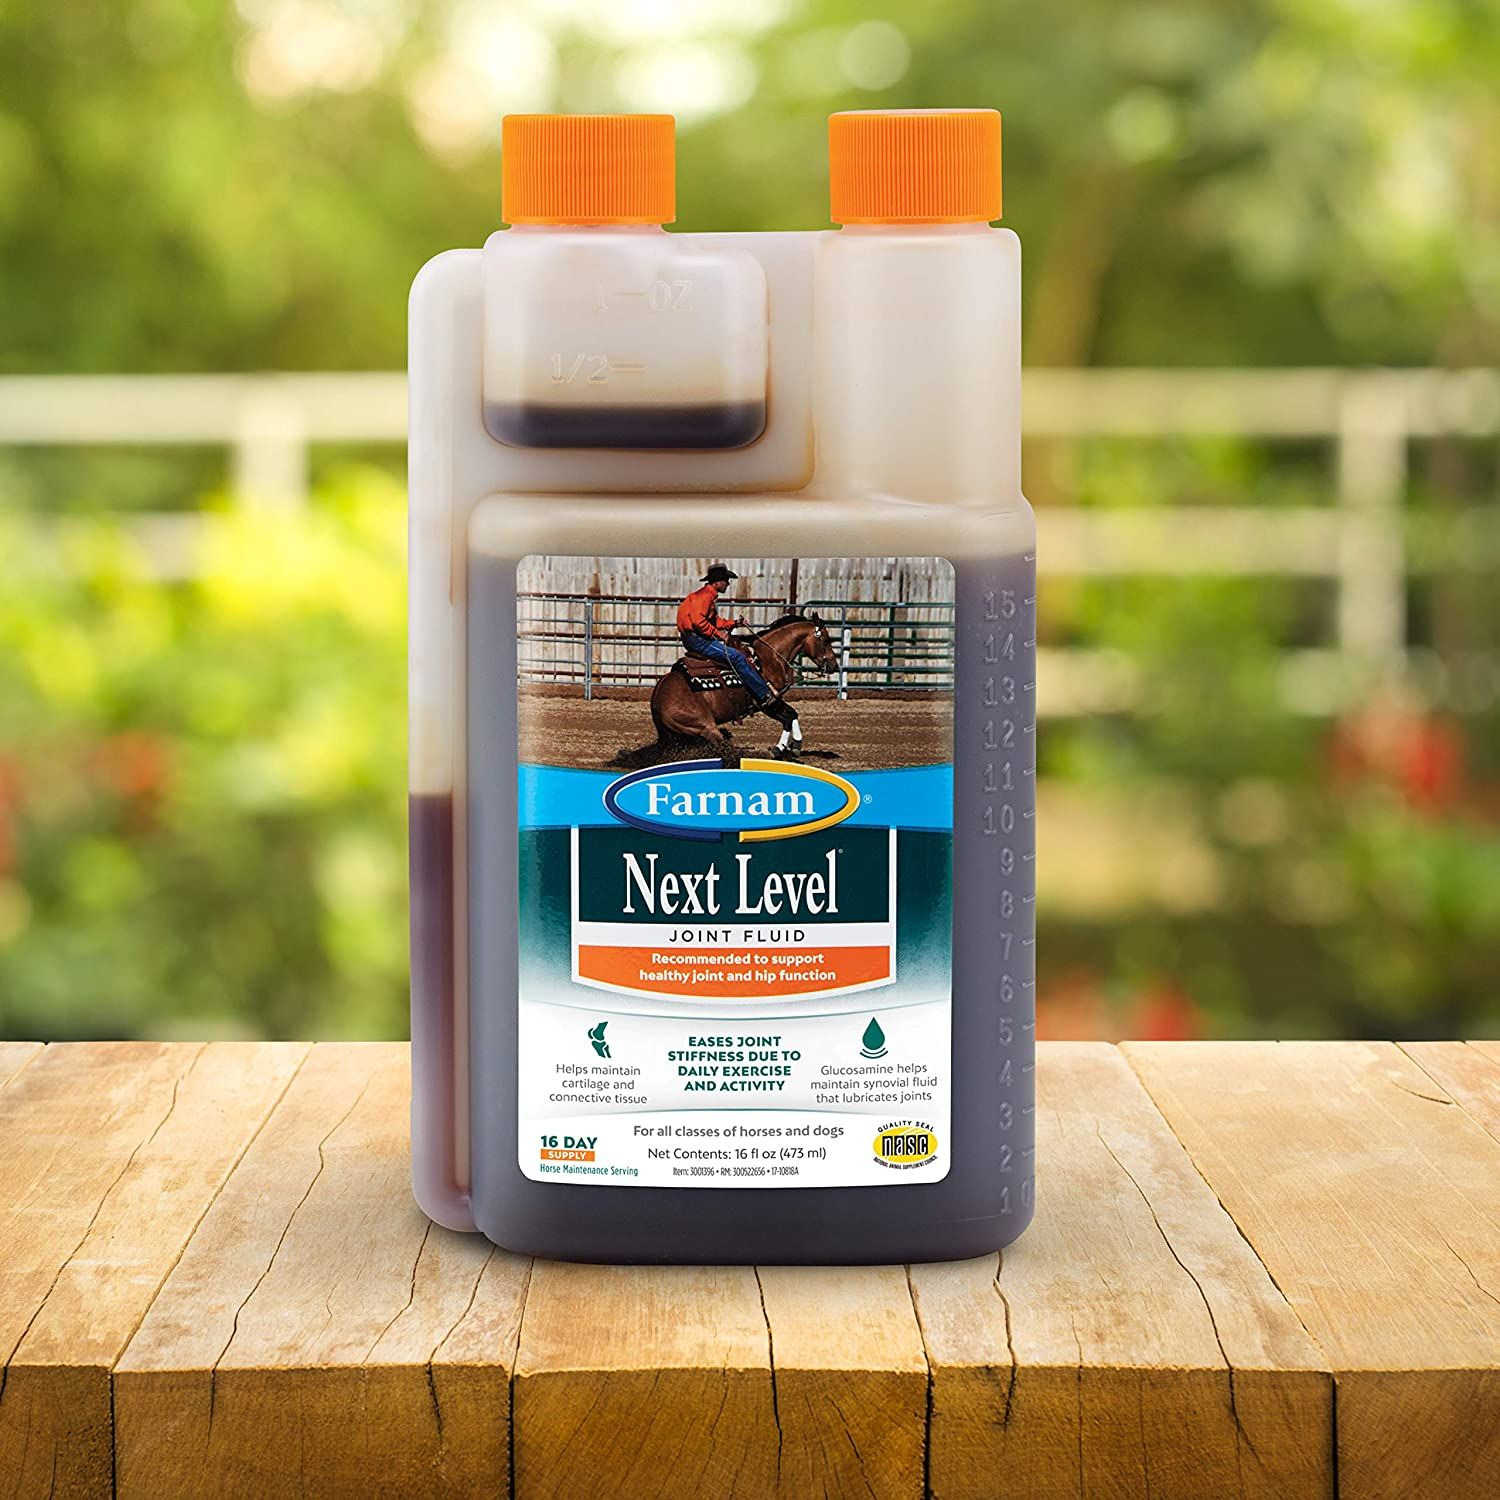 Farnam Next Level Joint Fluid Supplement for horses and dogs, Helps 16 ounces 